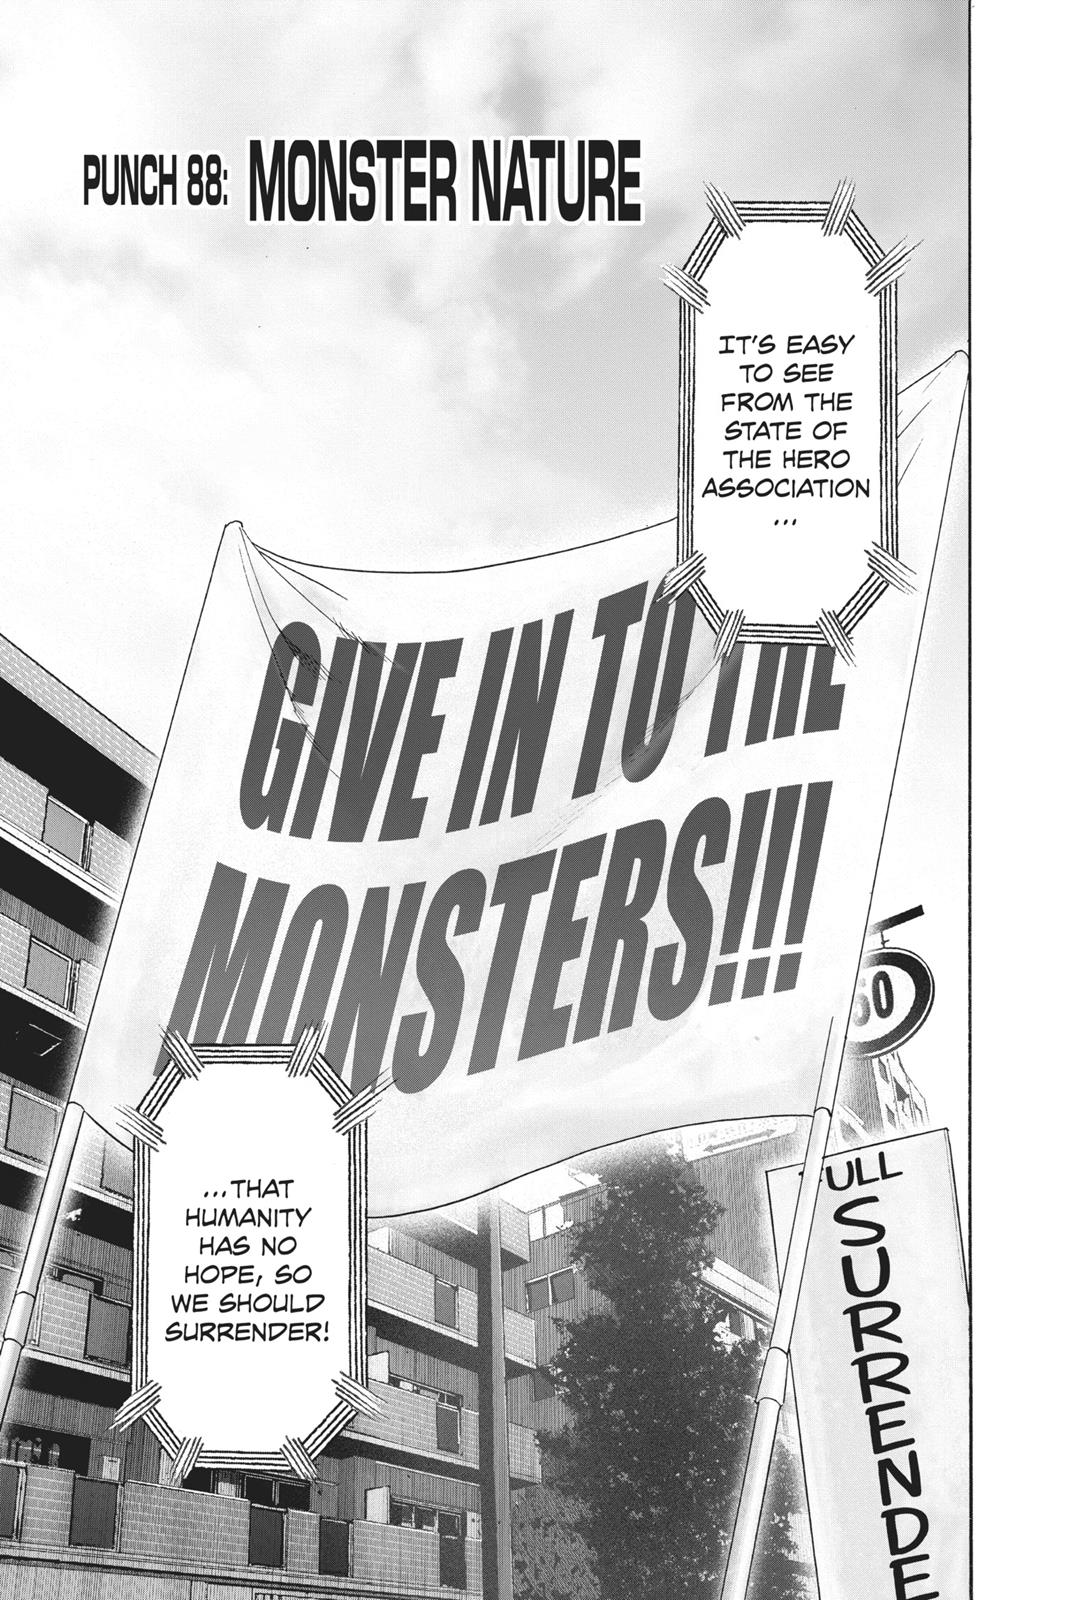 One-Punch Man, Punch 88 image 07